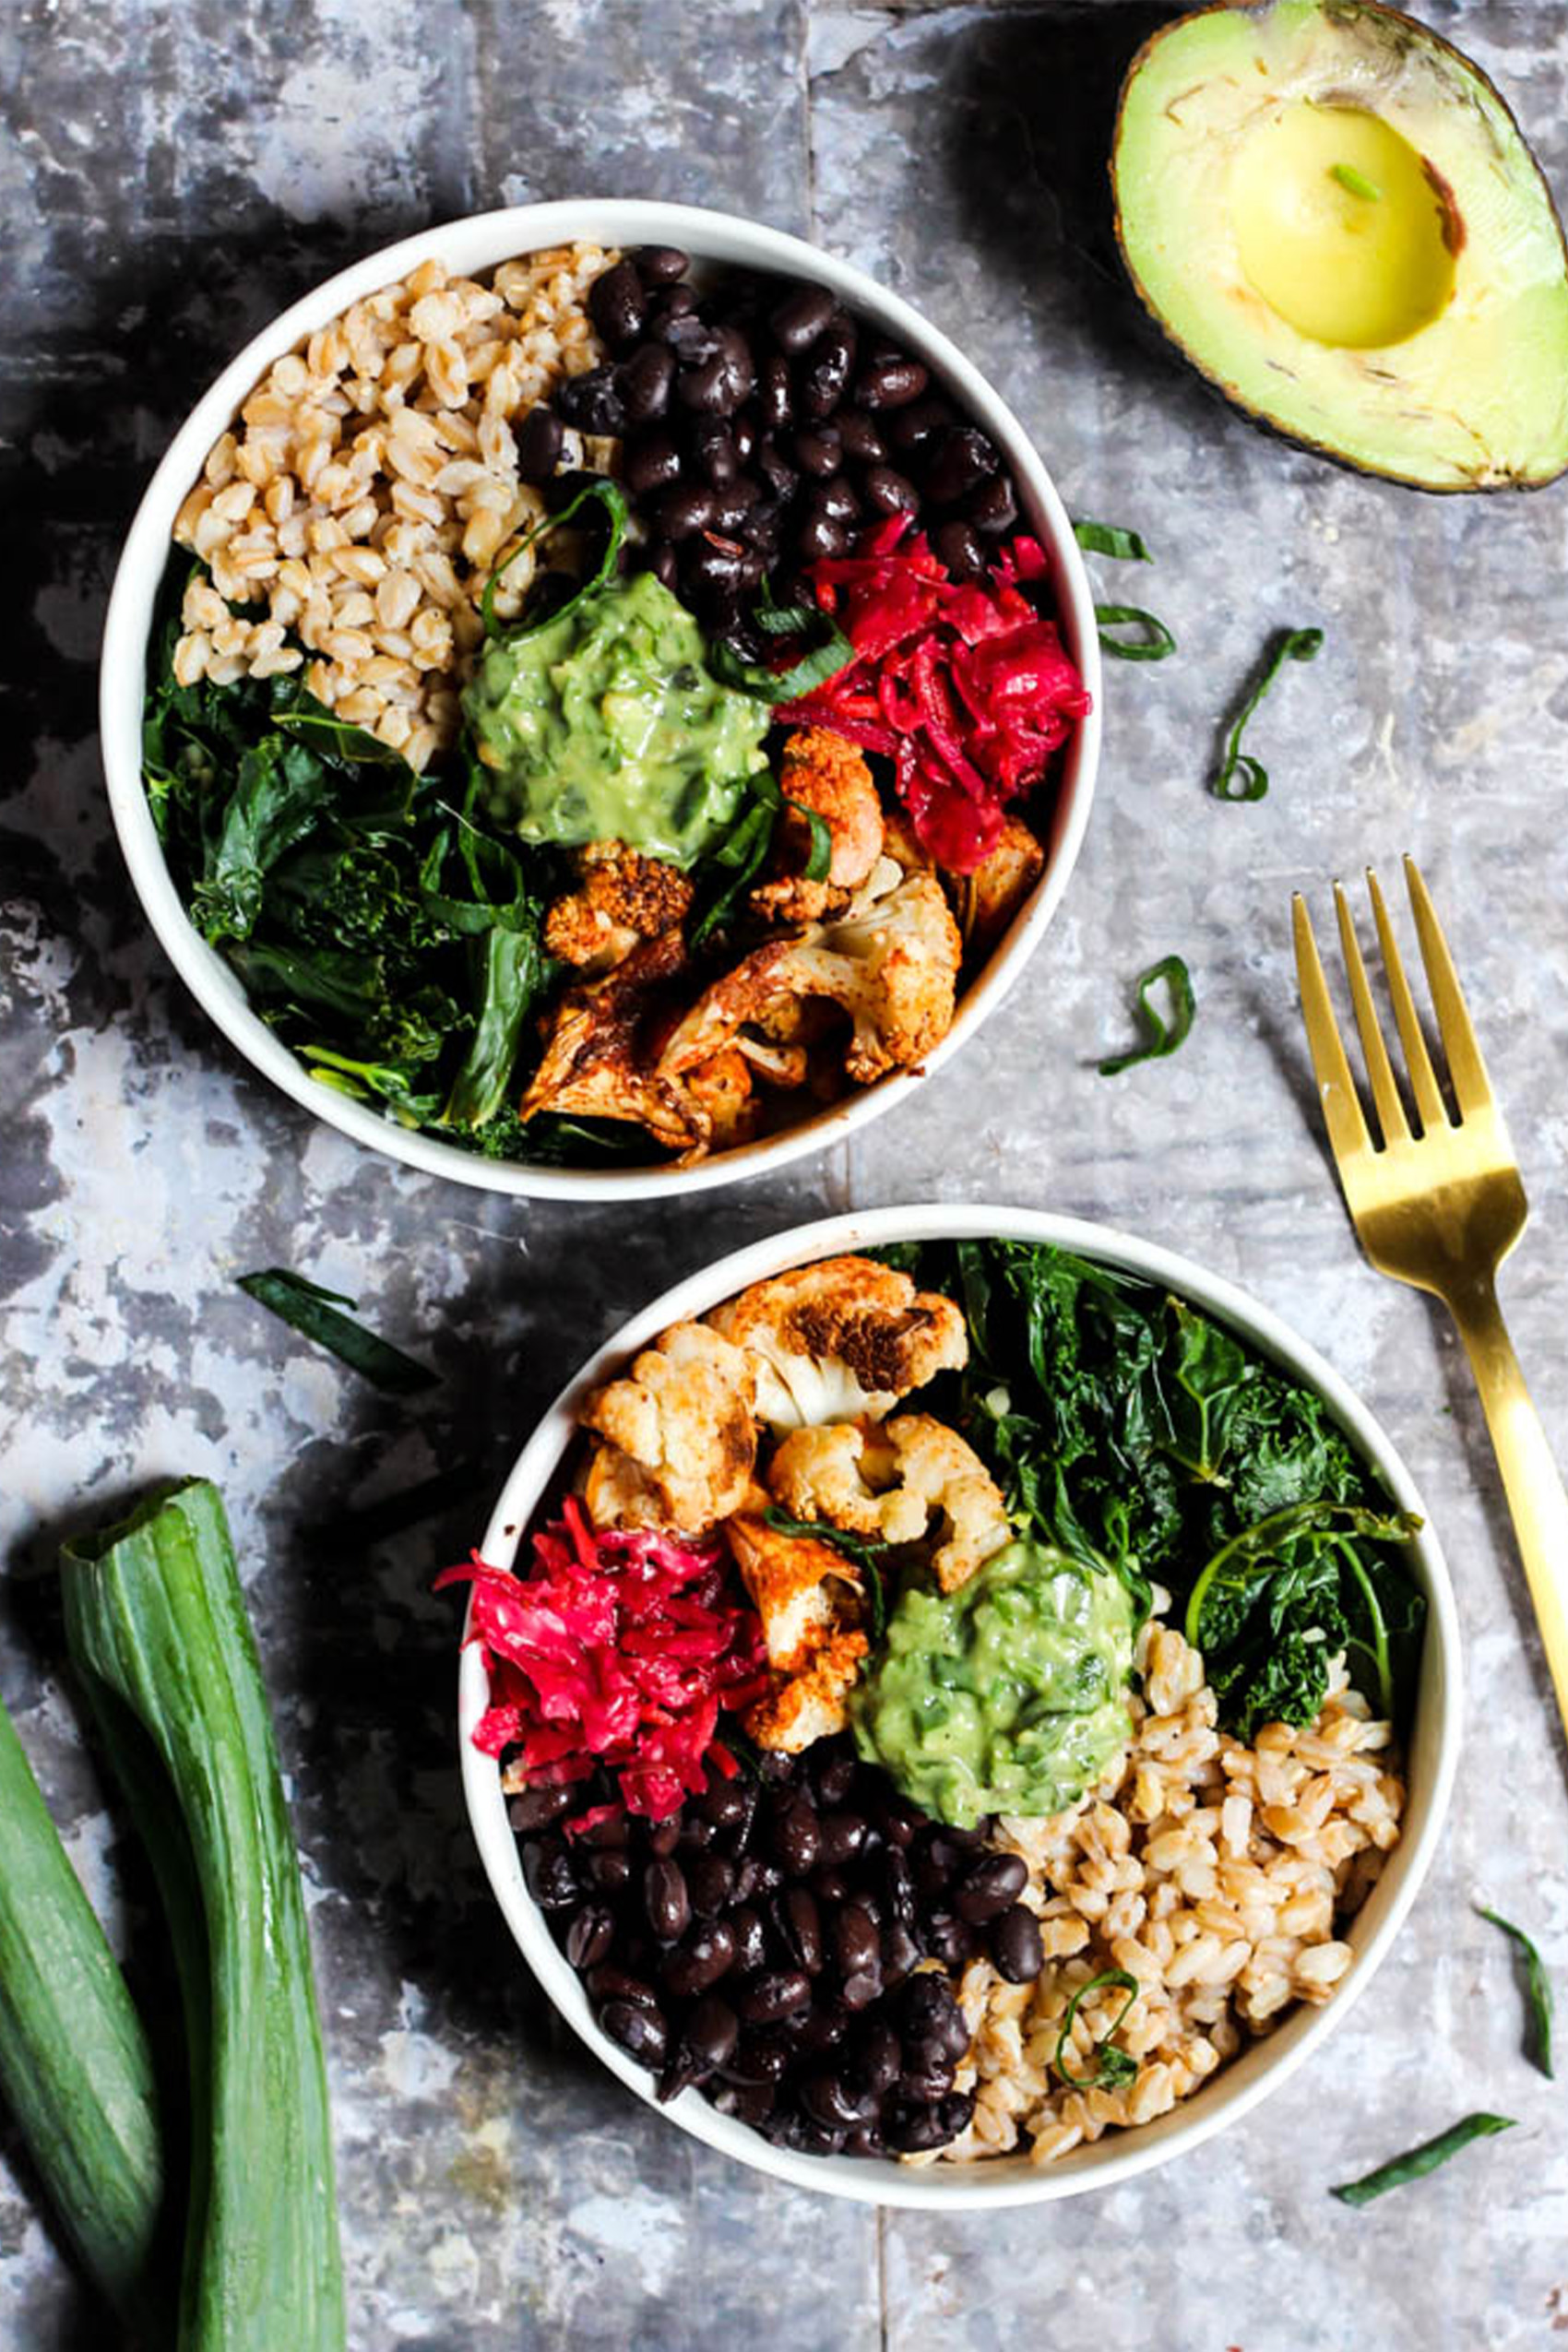 two lunch bowls with rice, black beans, pesto, cauliflower and cabbage